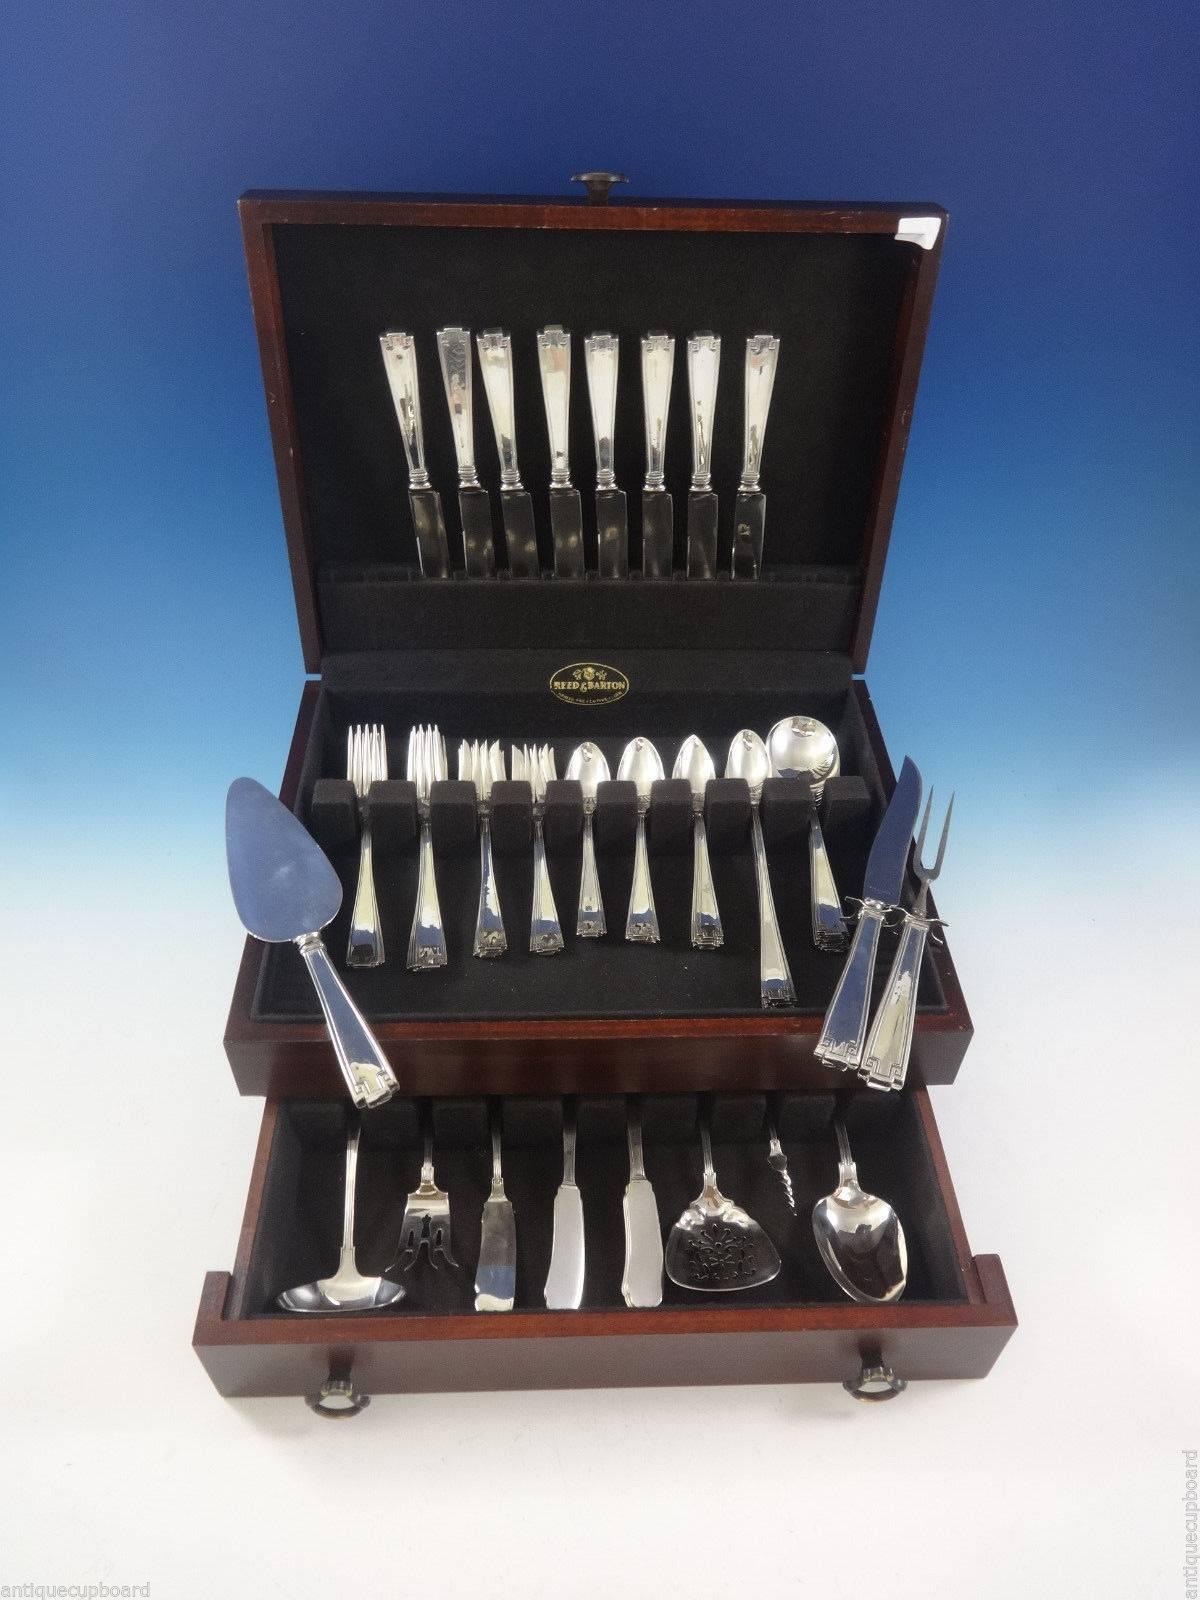 Etruscan by Gorham sterling silver flatware set - 81 pieces. This set includes: 

Eight knives, 8 1/2